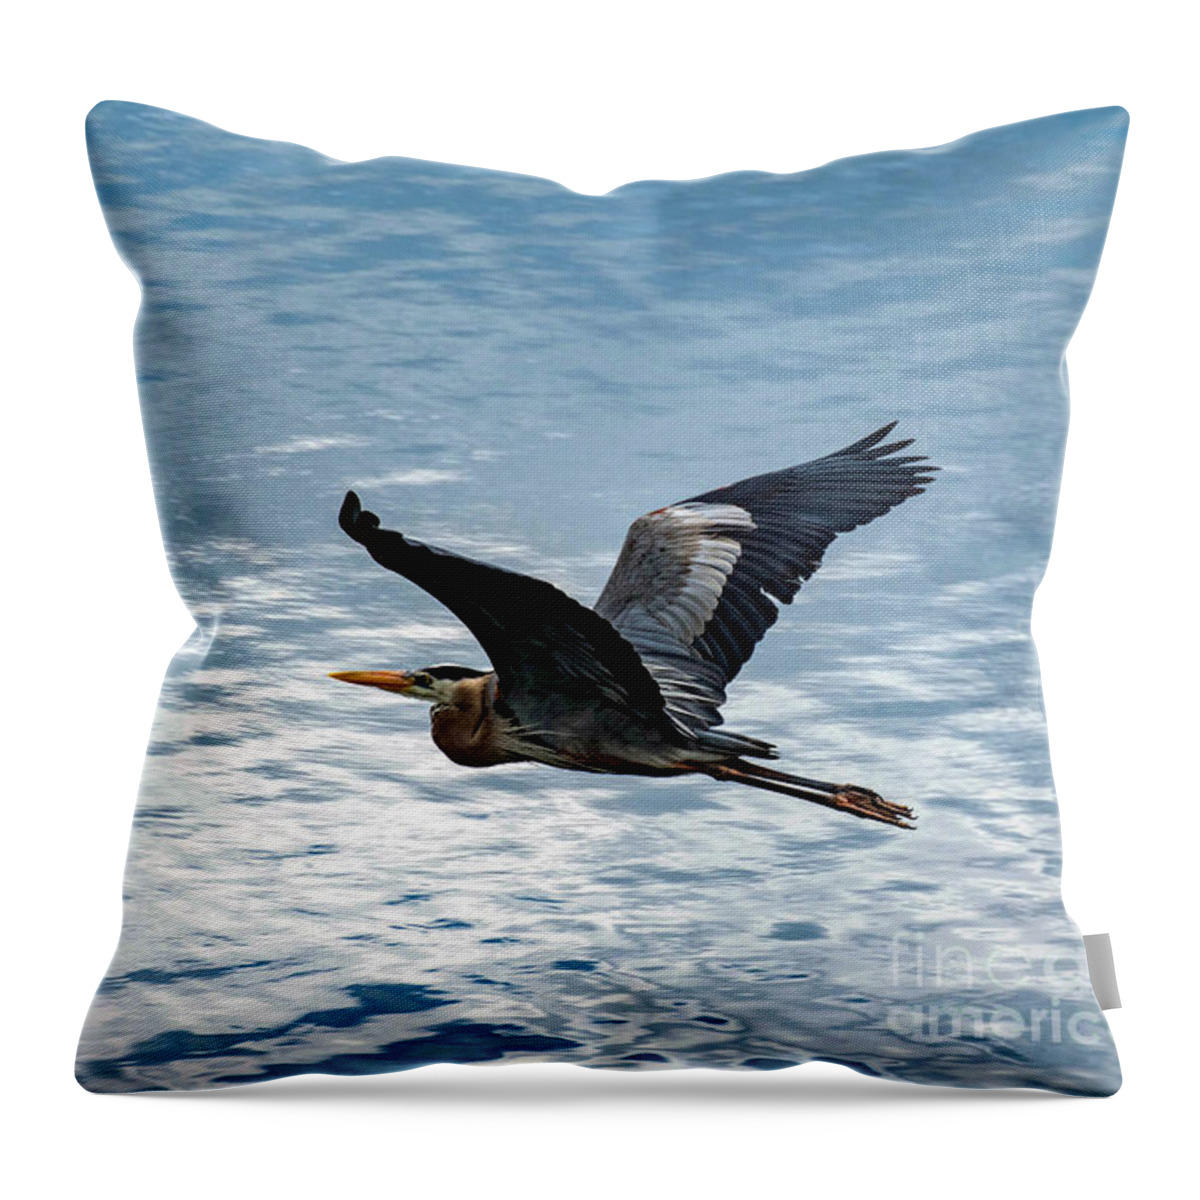 Great Throw Pillow featuring the photograph Great Blue Heron In Flight by Beachtown Views